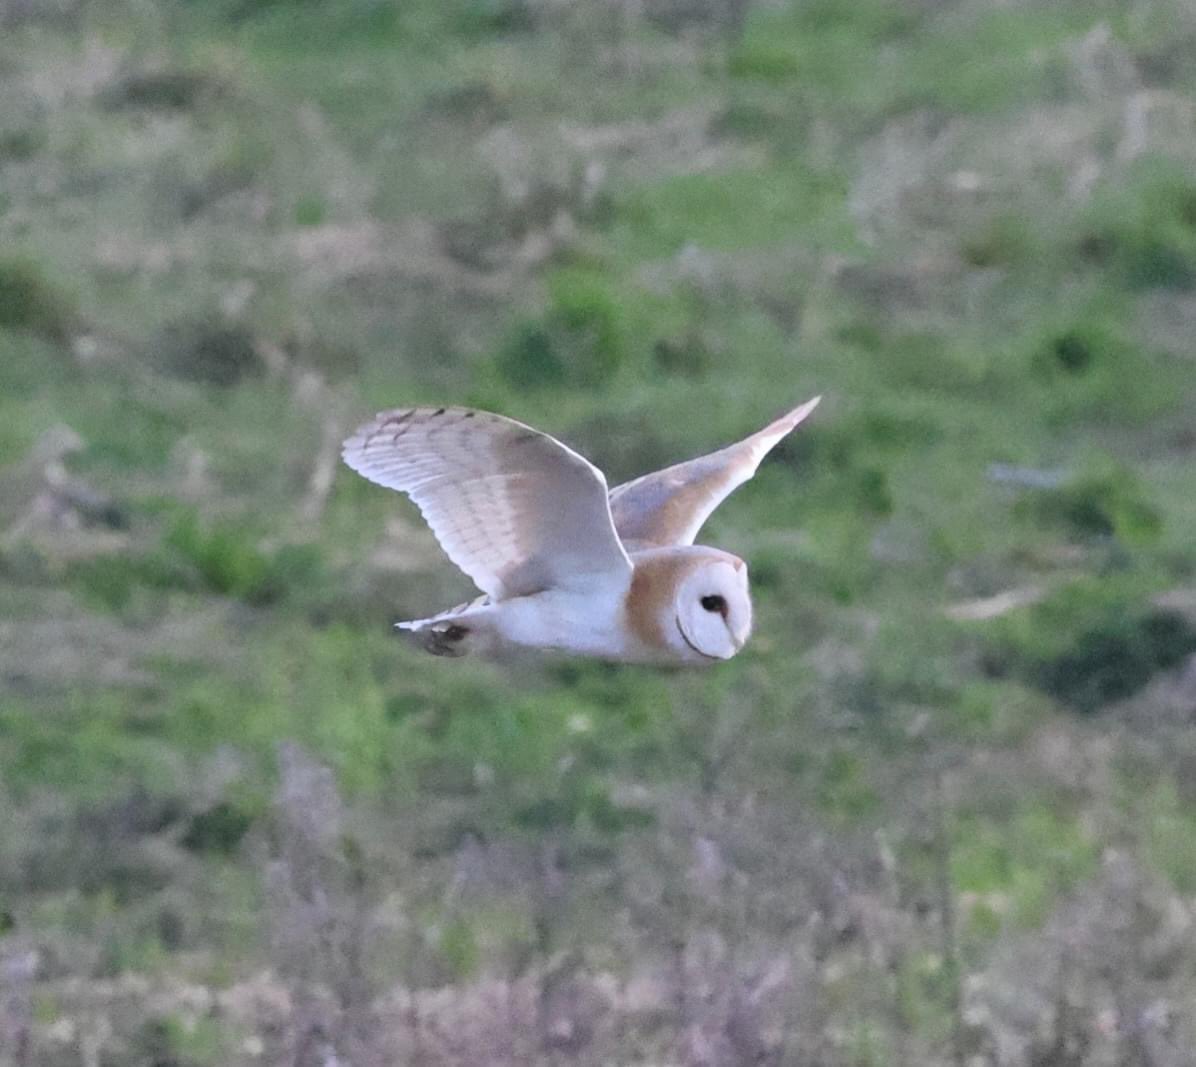 I often hear tawny owls calling outside my university accommodation at night, but have only rarely managed to catch a glimpse 🦉 On the flip side, I have non-birding friends who have casually spotted barn owls locally! As well as time/knowledge some birds also require pure luck!